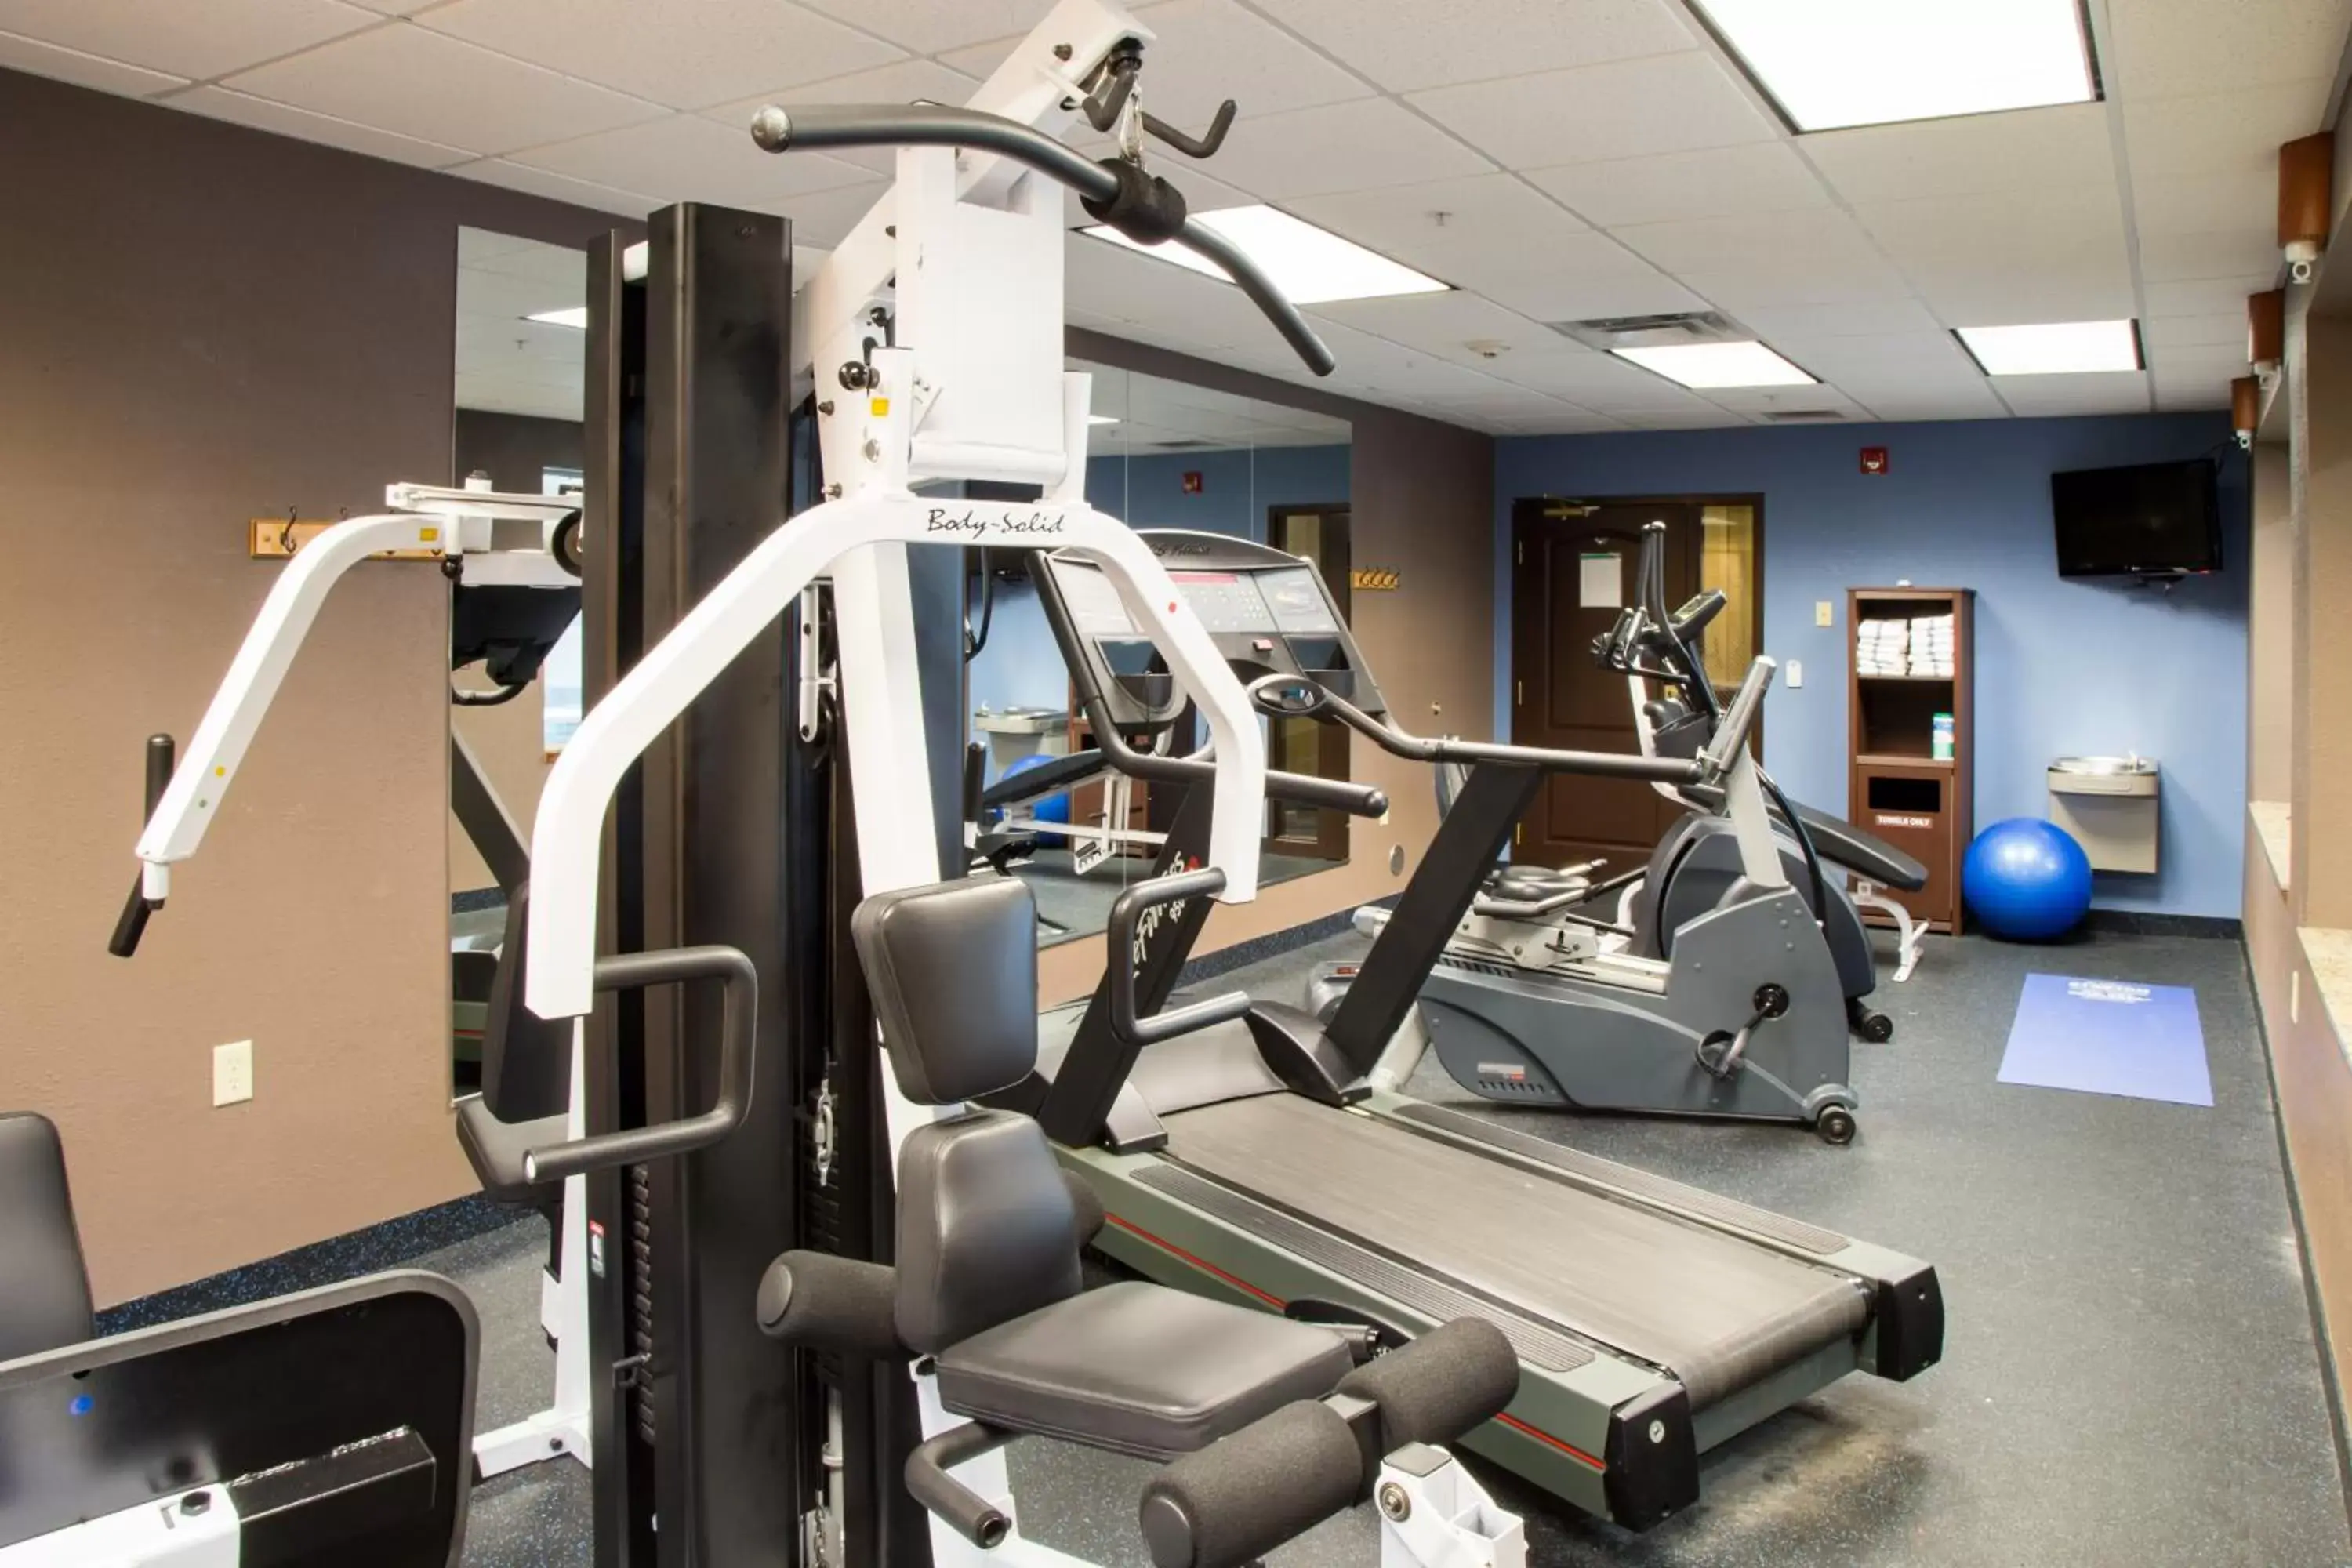 Fitness centre/facilities, Fitness Center/Facilities in Best Western Executive Inn & Suites